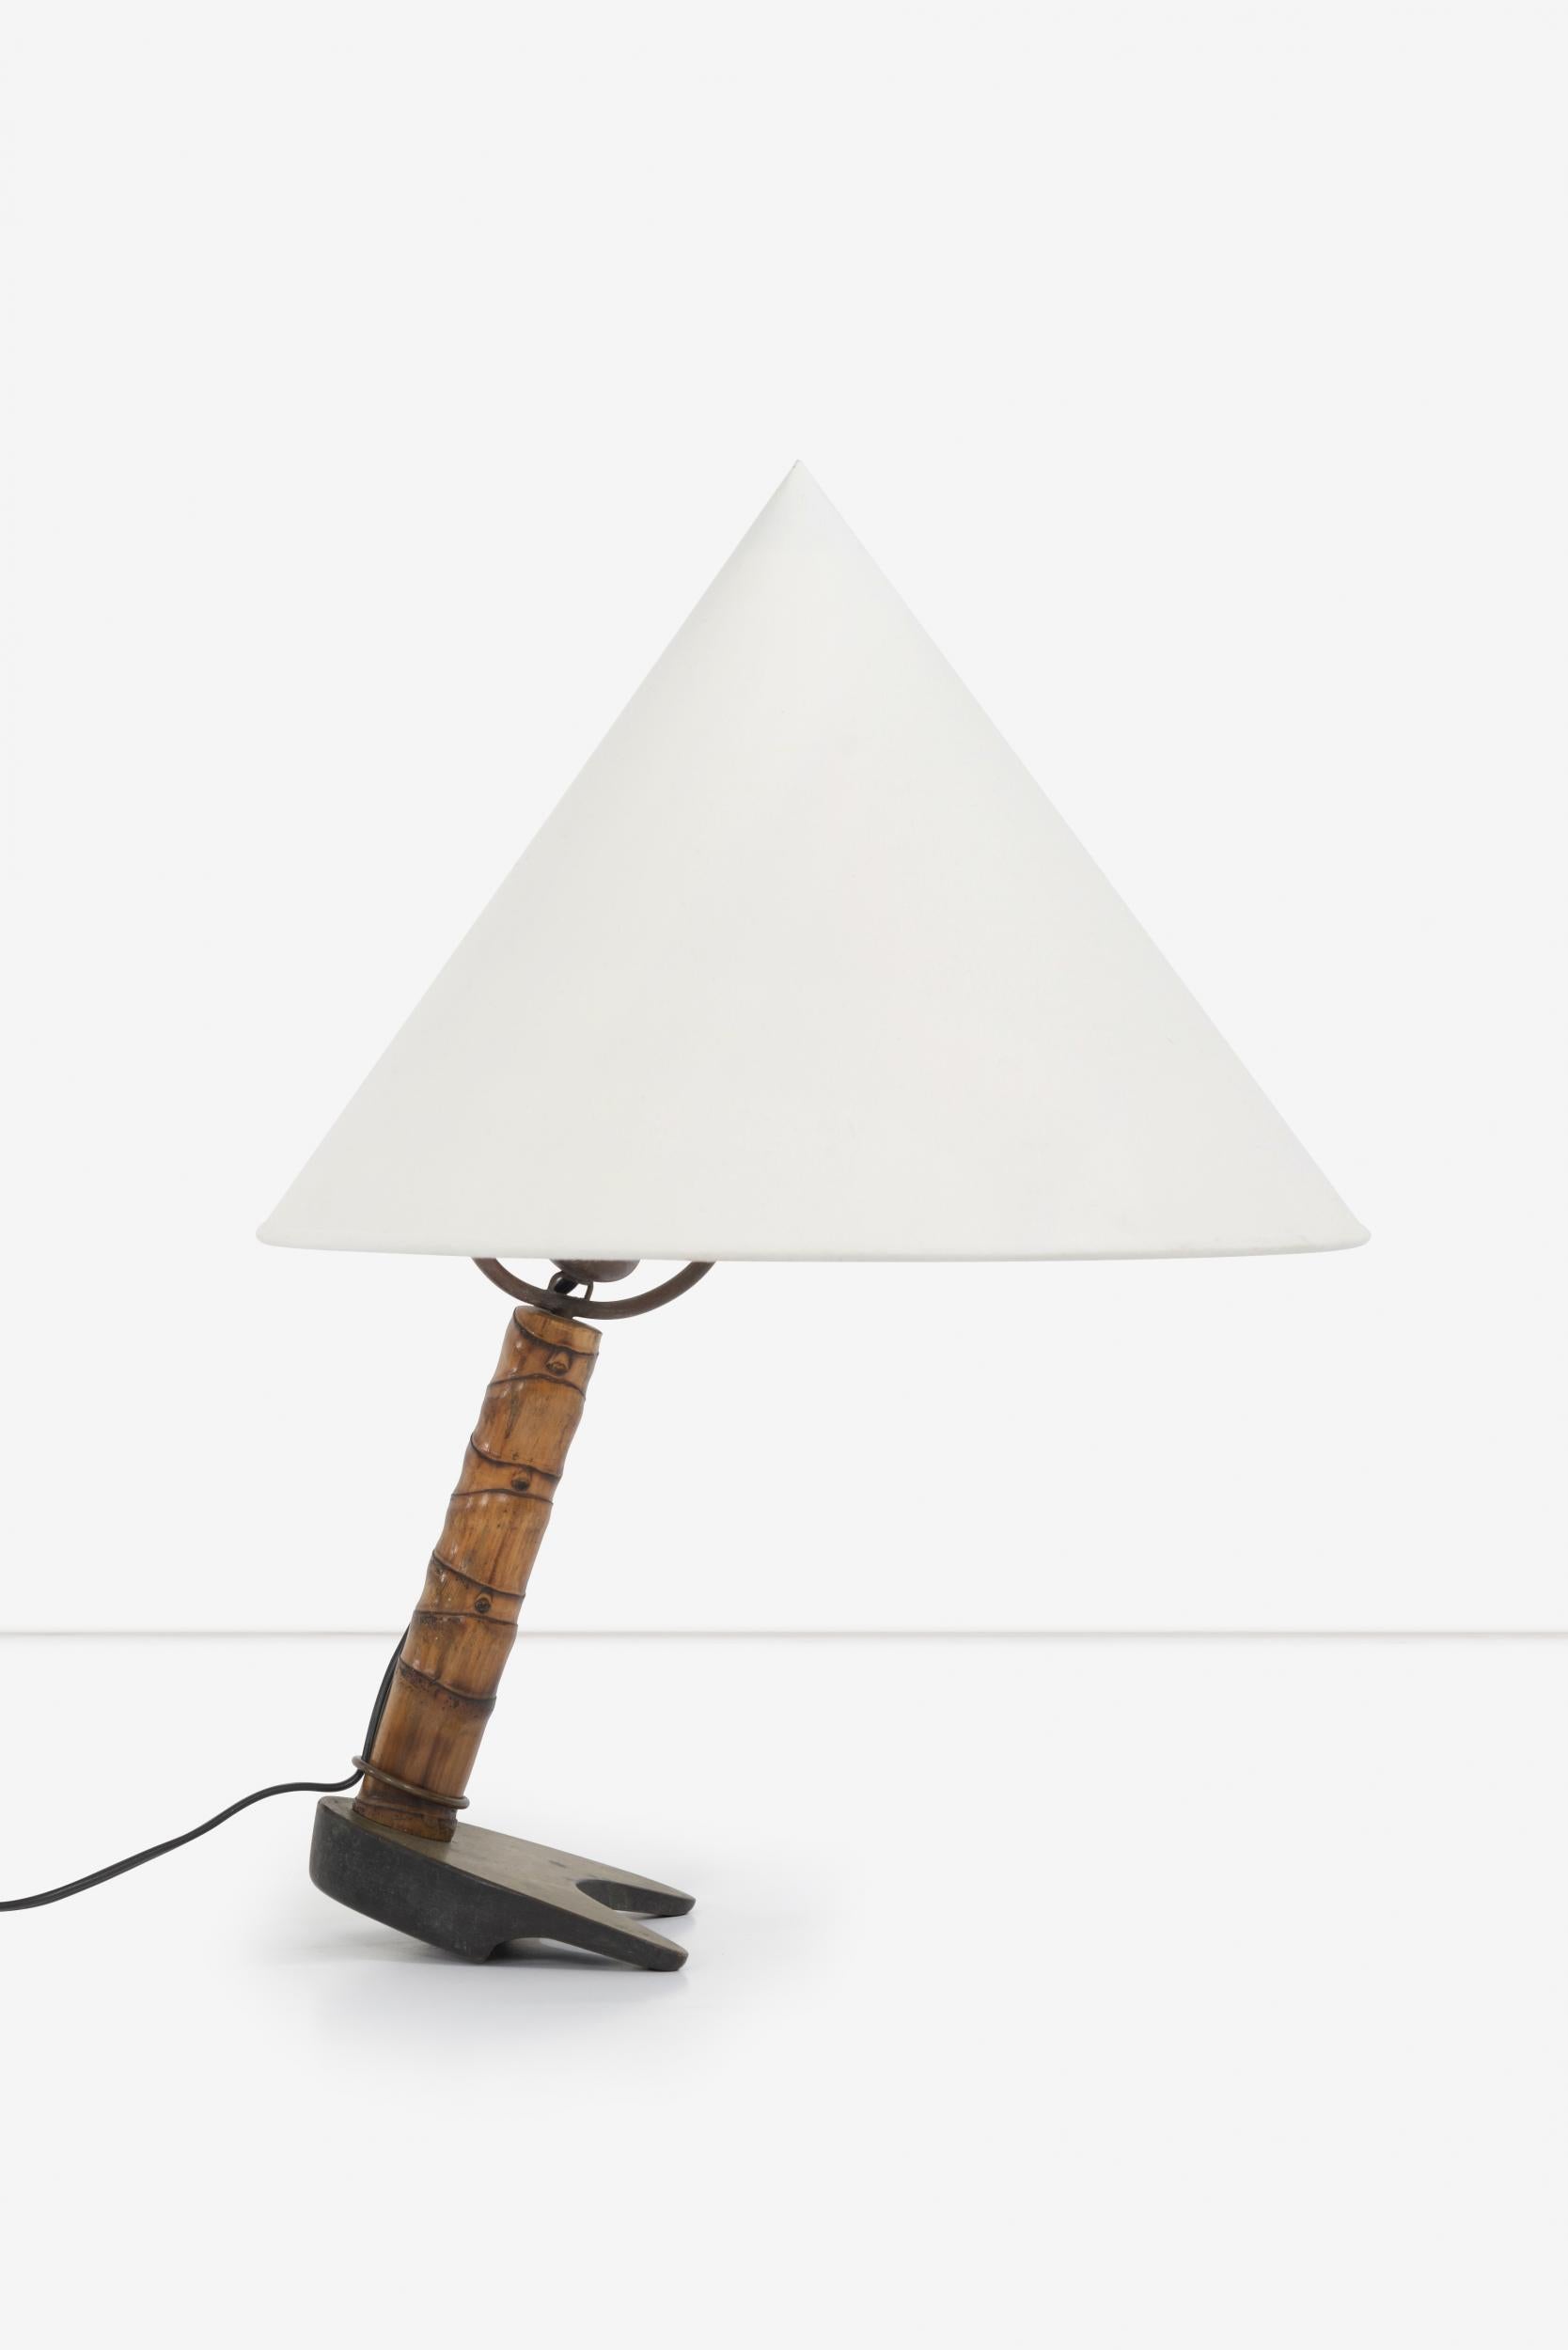 Carl Auböck 2 position desk lamp, this adjustable lamp can be tilted at various angles and the silk shade pivots to accommodate the tilt. Impressed manufacturer's mark to base ‘Made in Austria Auböck’.
  